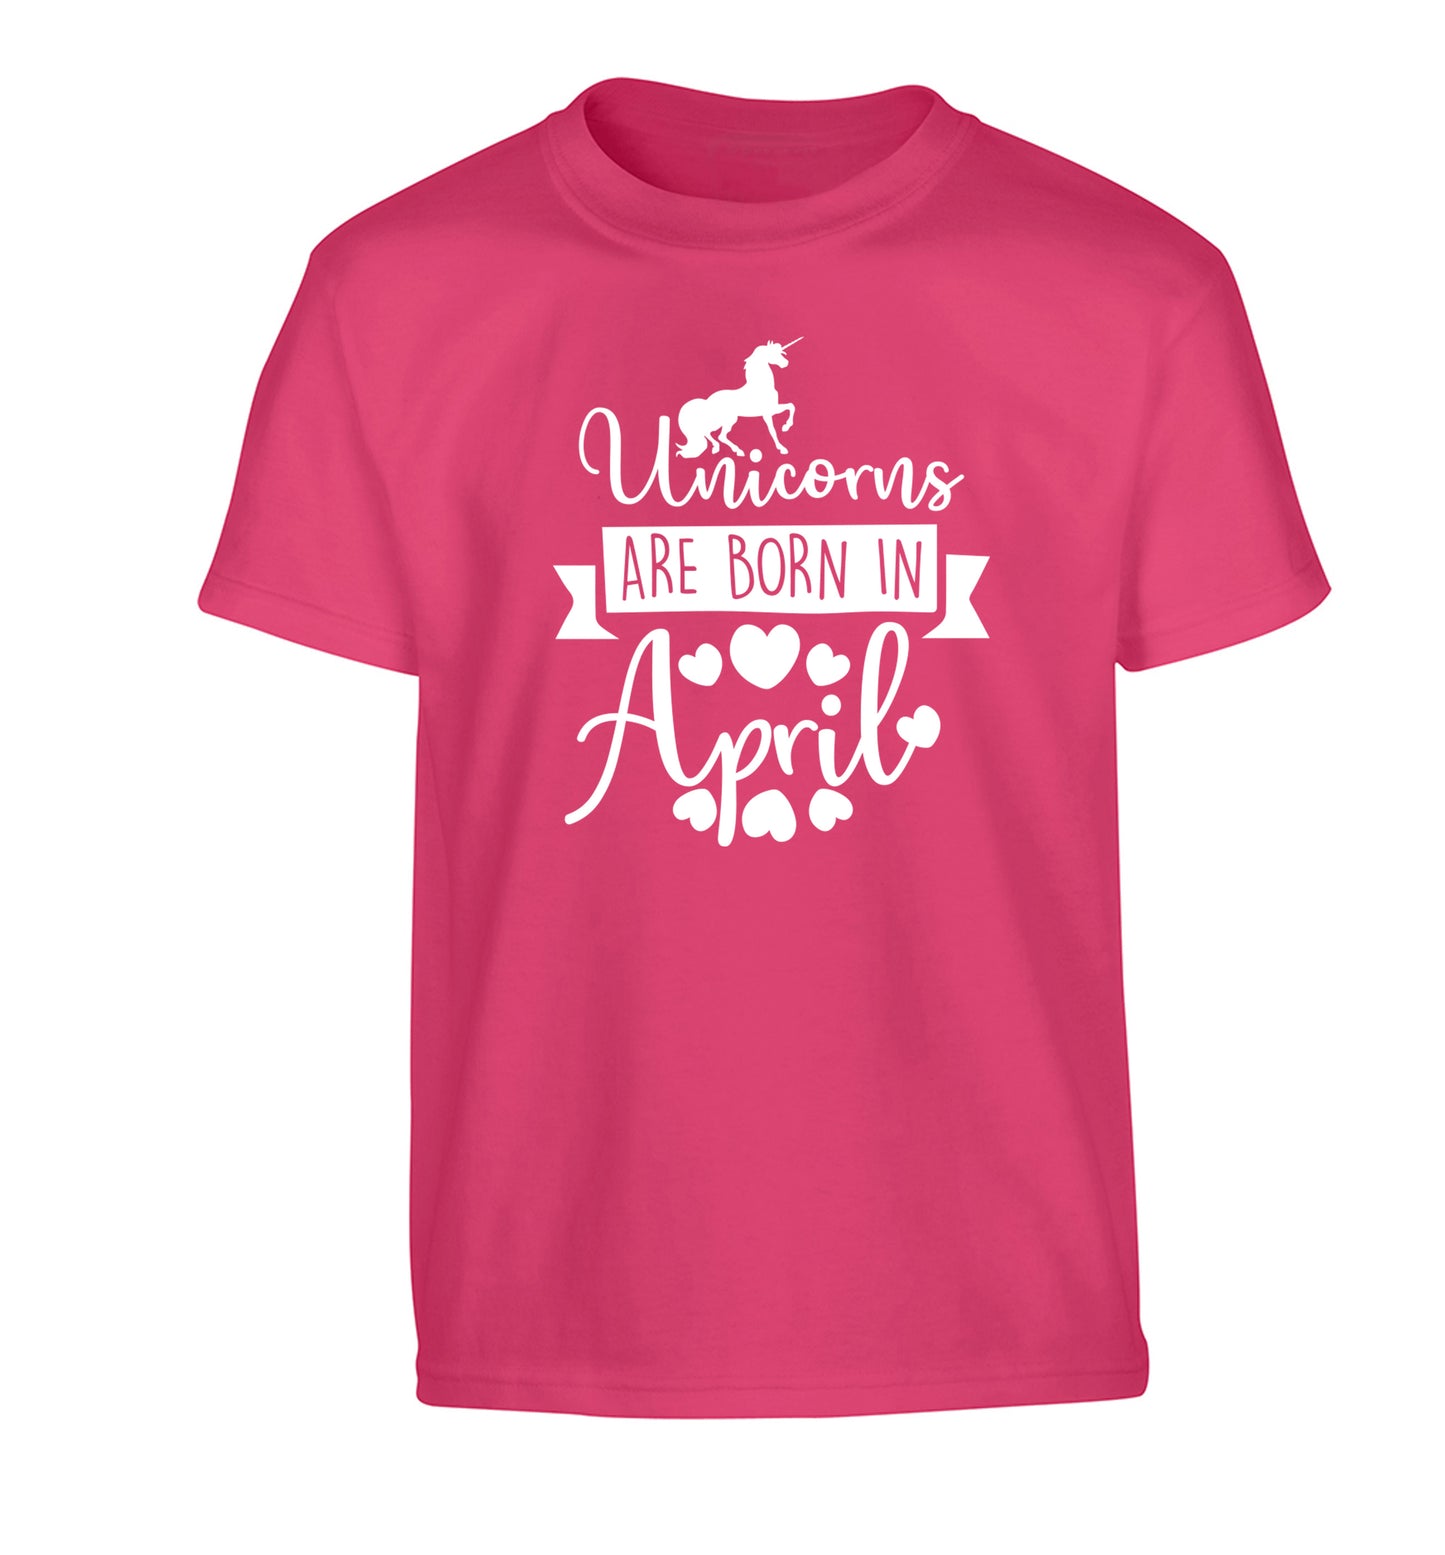 Unicorns are born in April Children's pink Tshirt 12-13 Years